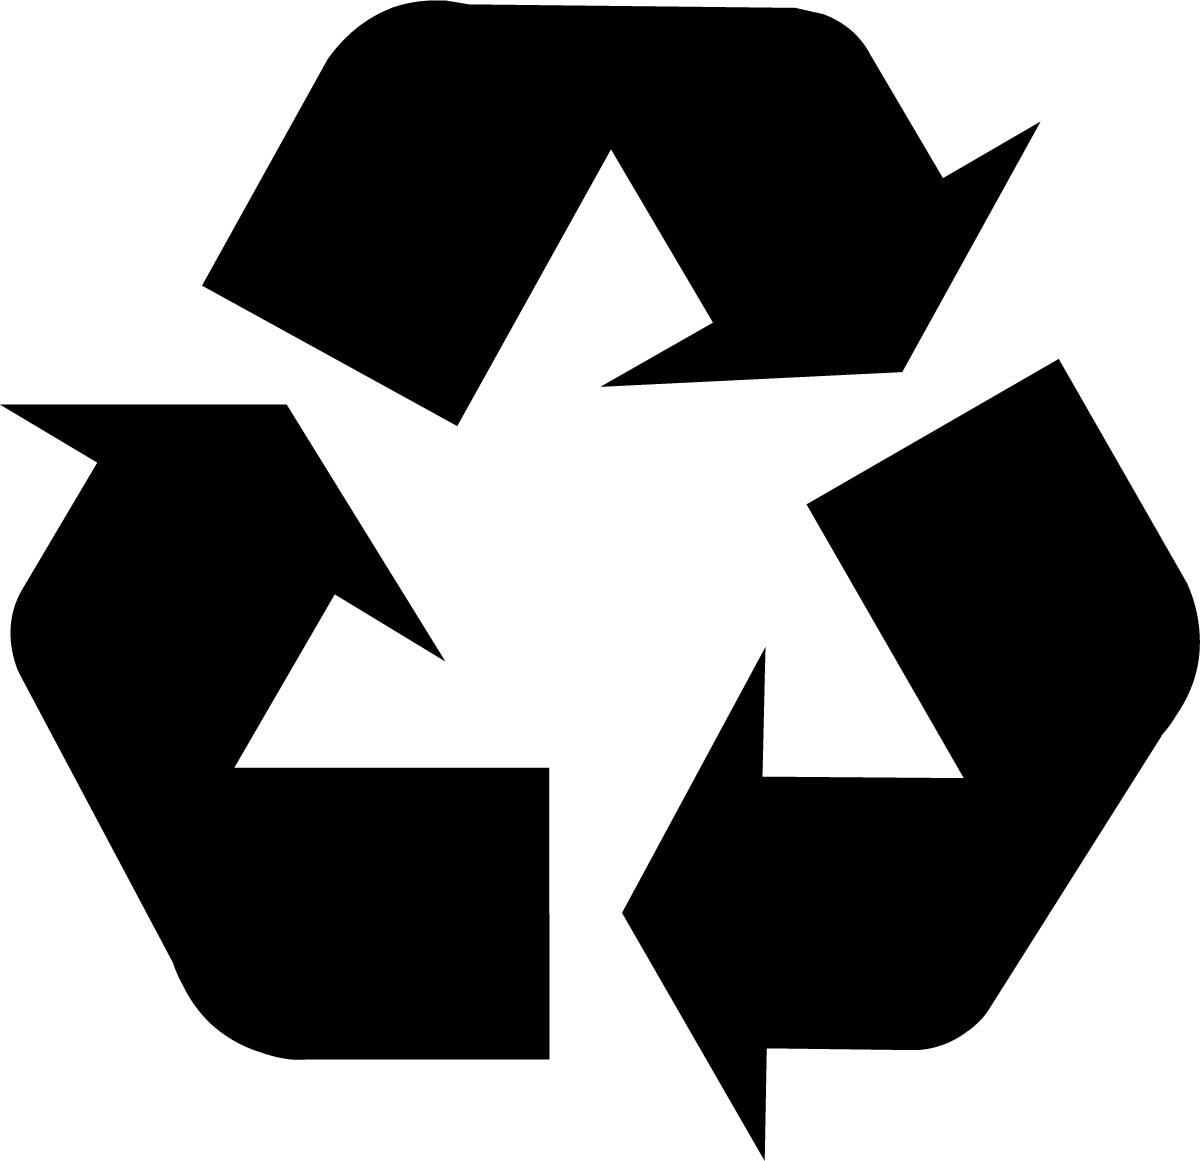 Recycled-Paper Logo - Recycling Symbol the Original Recycle Logo